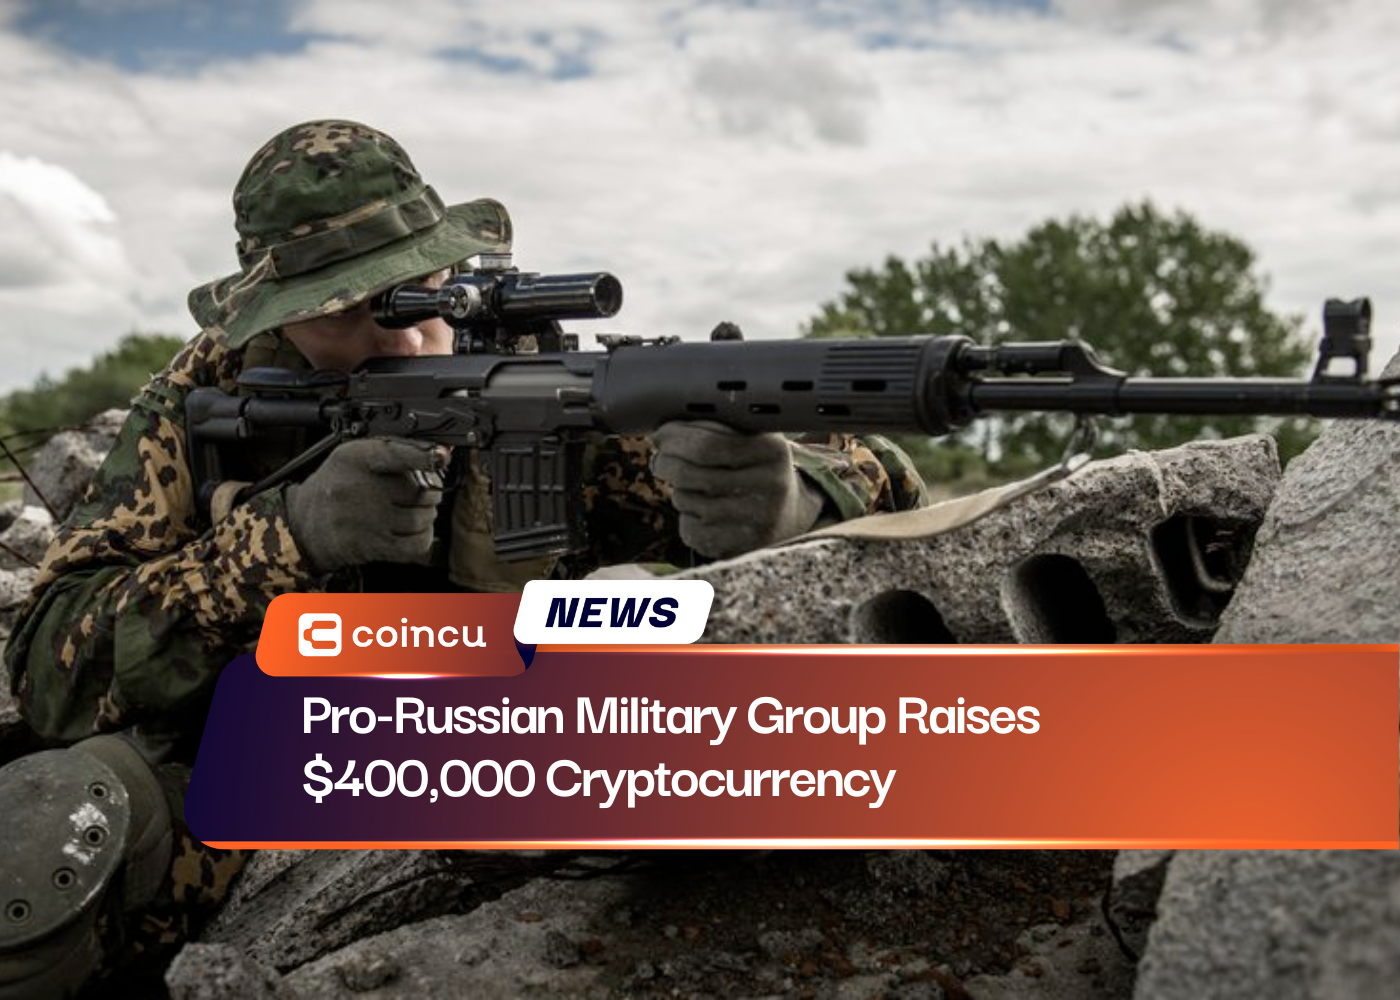 Pro-Russian Military Group Raises $400,000 Cryptocurrency